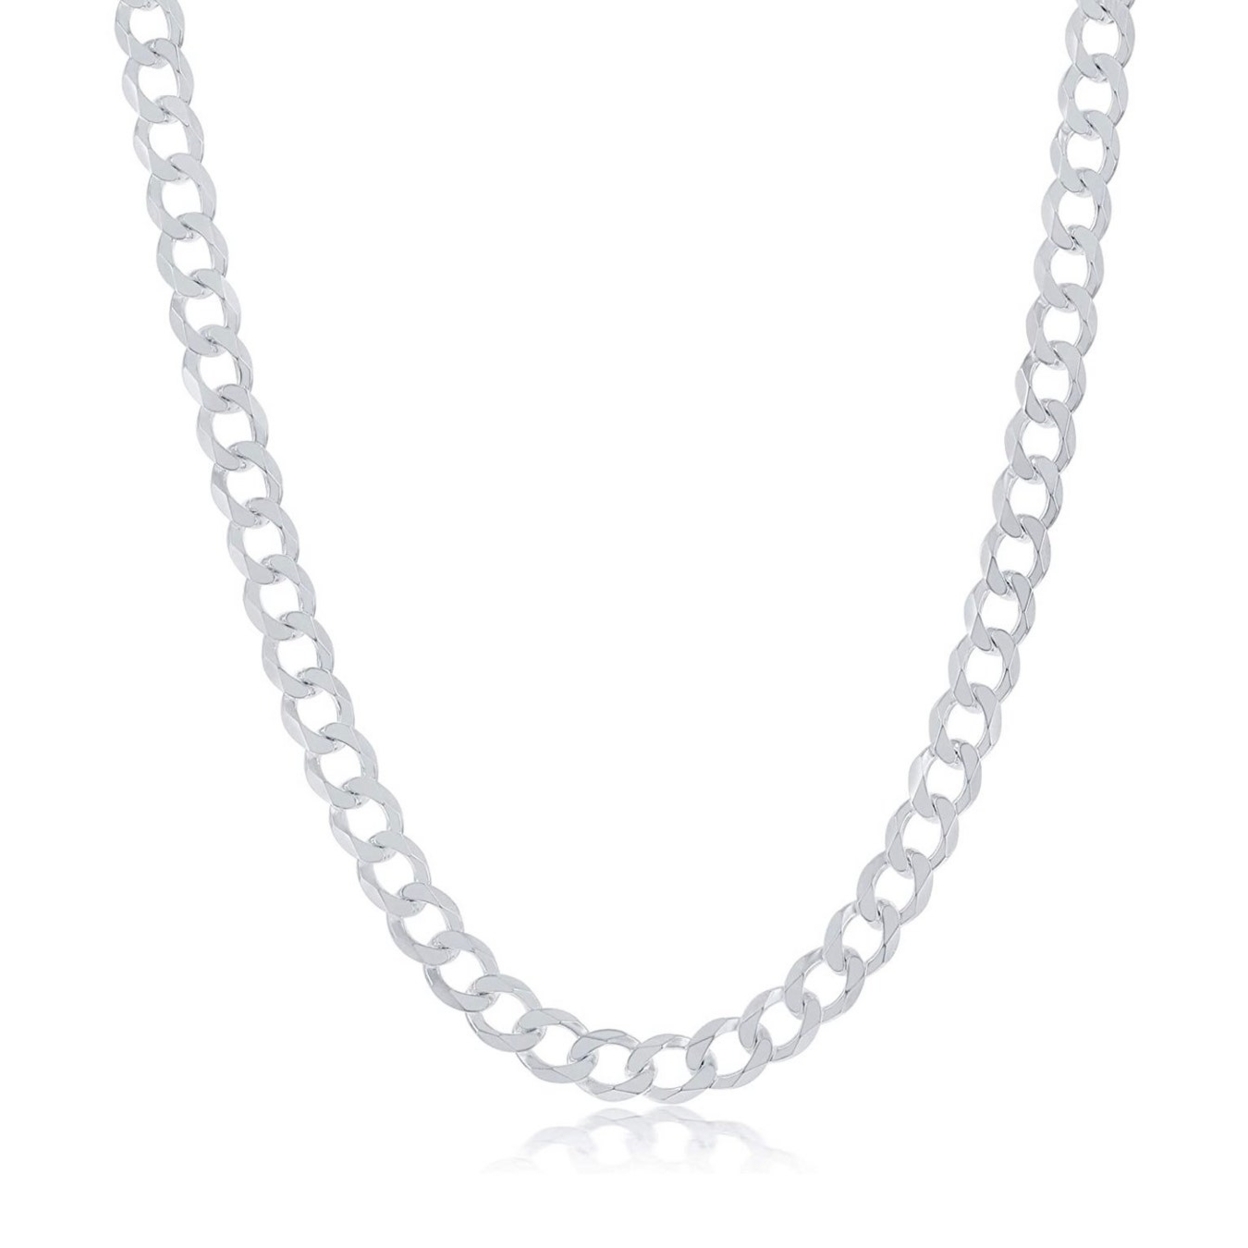 5mm Silver Filled High Polish Finsh .925 Curb Cuban Link Chain Necklace